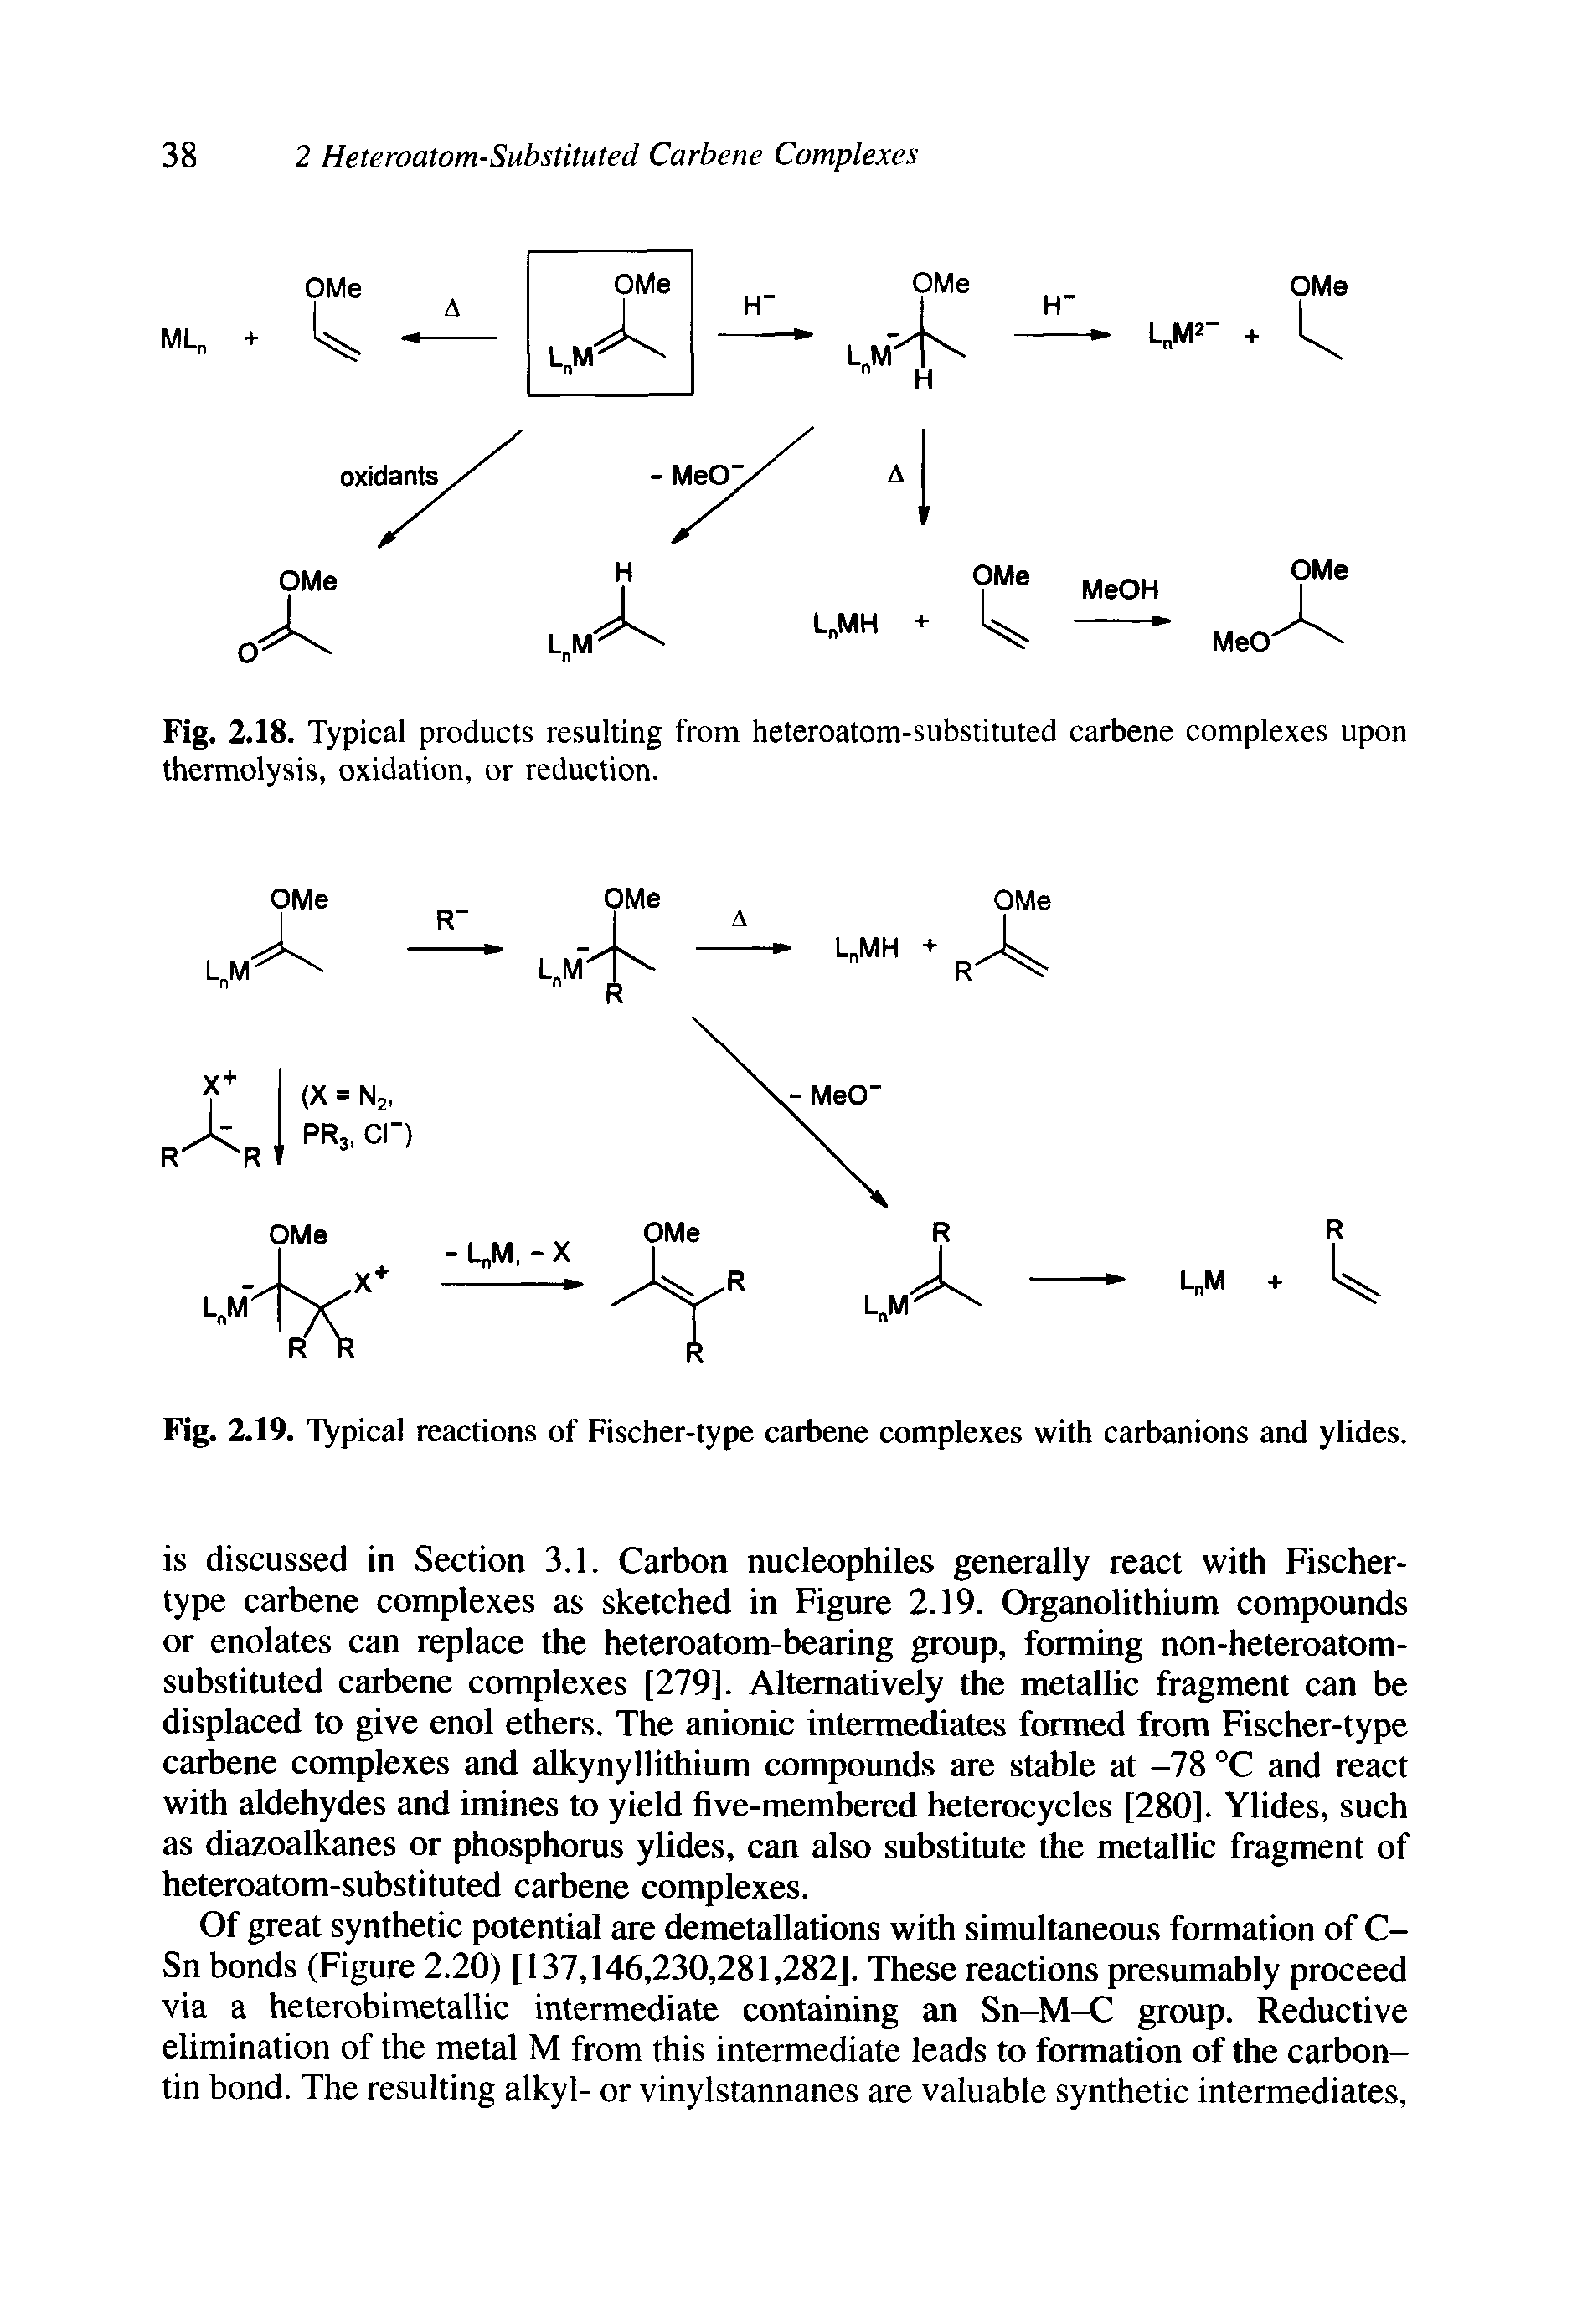 Fig. 2.19. Typical reactions of Fischer-type carbene complexes with carbanions and ylides.